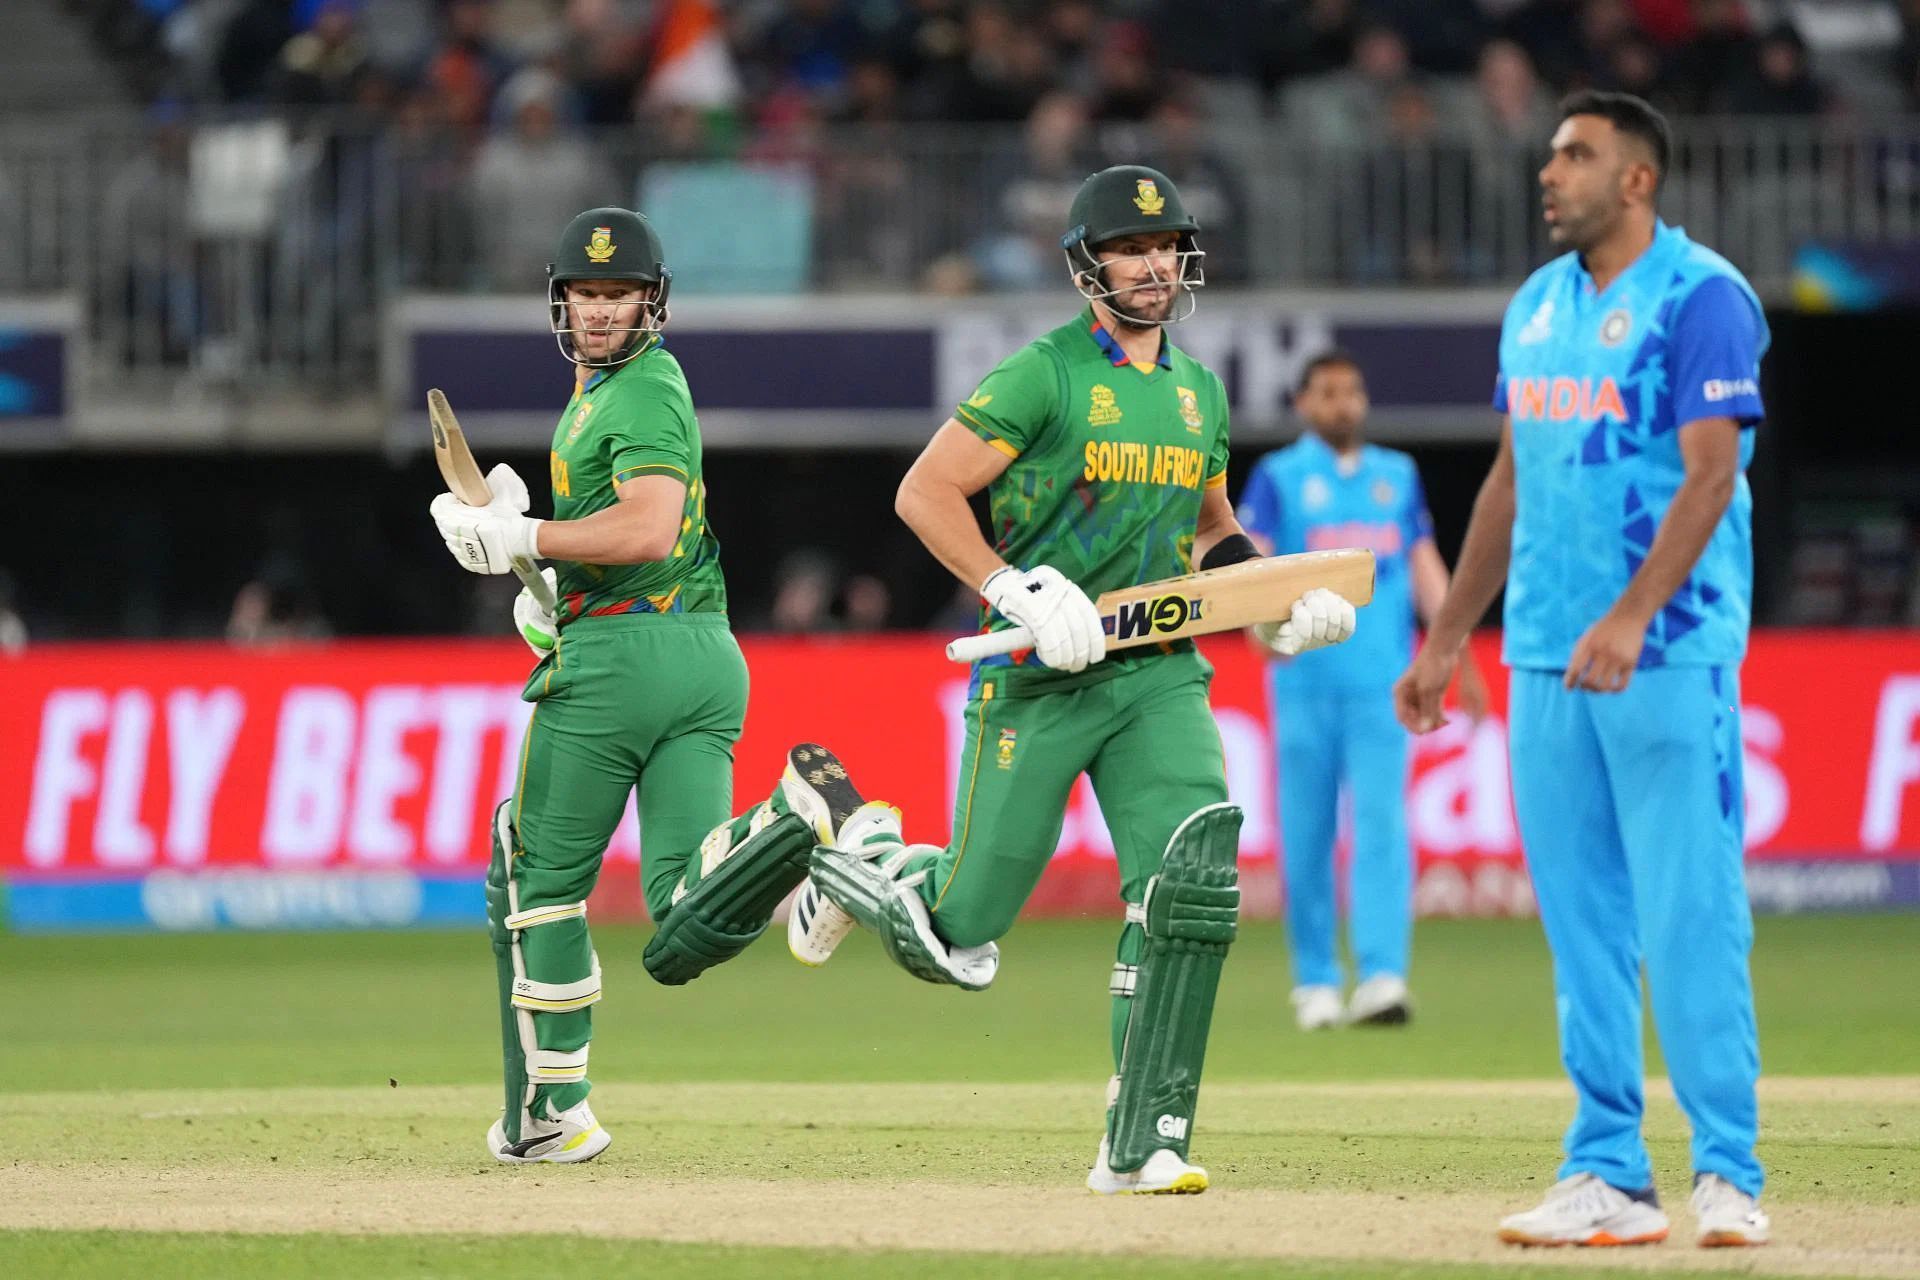 Arshdeep Singh&rsquo;s two early strikes gave Team India hope of defending a total of 133 against South Africa. However, half-centuries from Aiden Markram and David Miller lifted the Proteas to a hard-fought victory. Miller was particularly harsh on Ravichandran Ashwin, who ended the game with figures of 1/43 from his four overs.